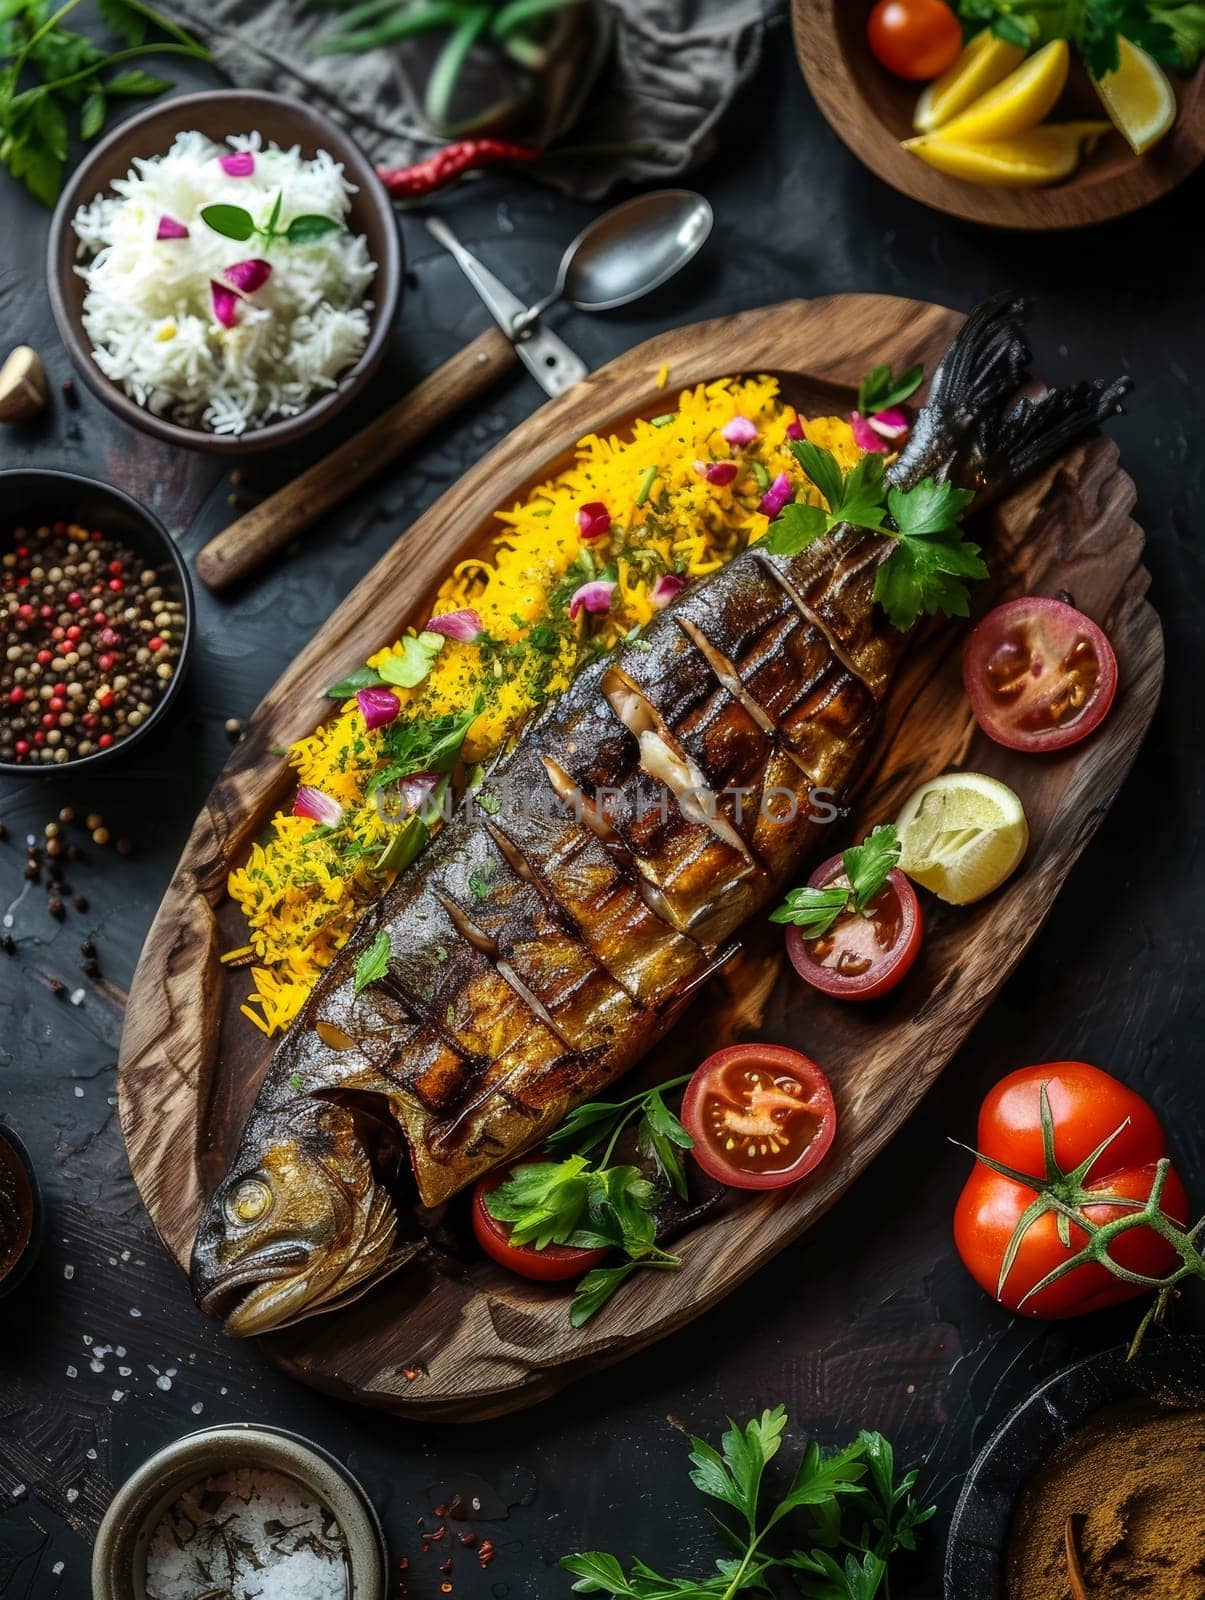 Iraqi masgouf, a traditional grilled carp dish seasoned with tamarind and turmeric, served on a rustic wooden platter. This savory, flavorful fish dish represents the cultural heritage. by sfinks